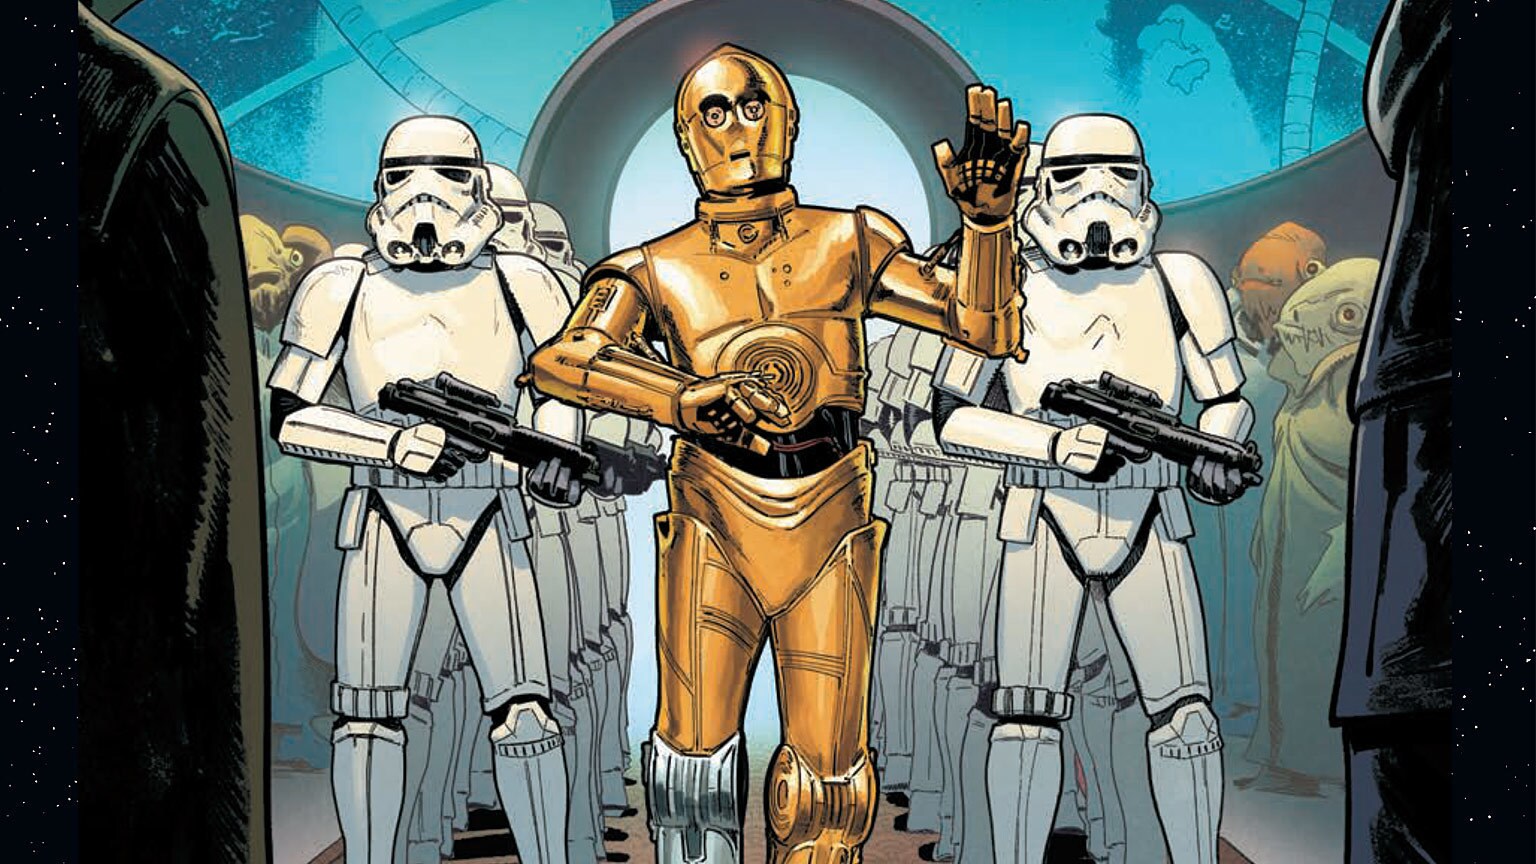 Kieron Gillen Chats About the Past, Present, and Future of Marvel’s Star Wars